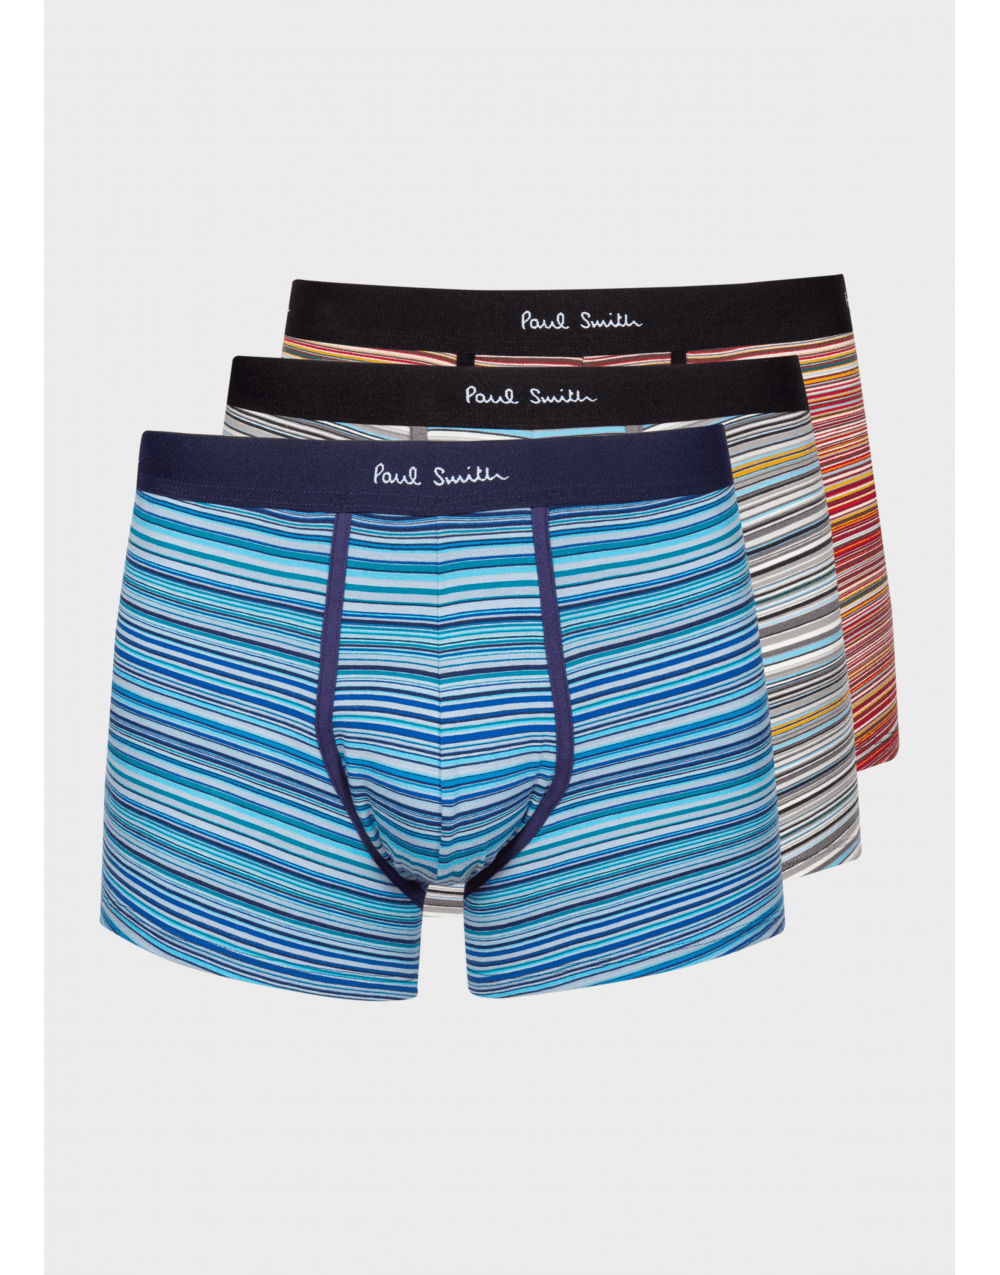 Paul Smith Paul Smith 3 Pack Underwear Col: Grey/blue/red All Stripe, Size: M